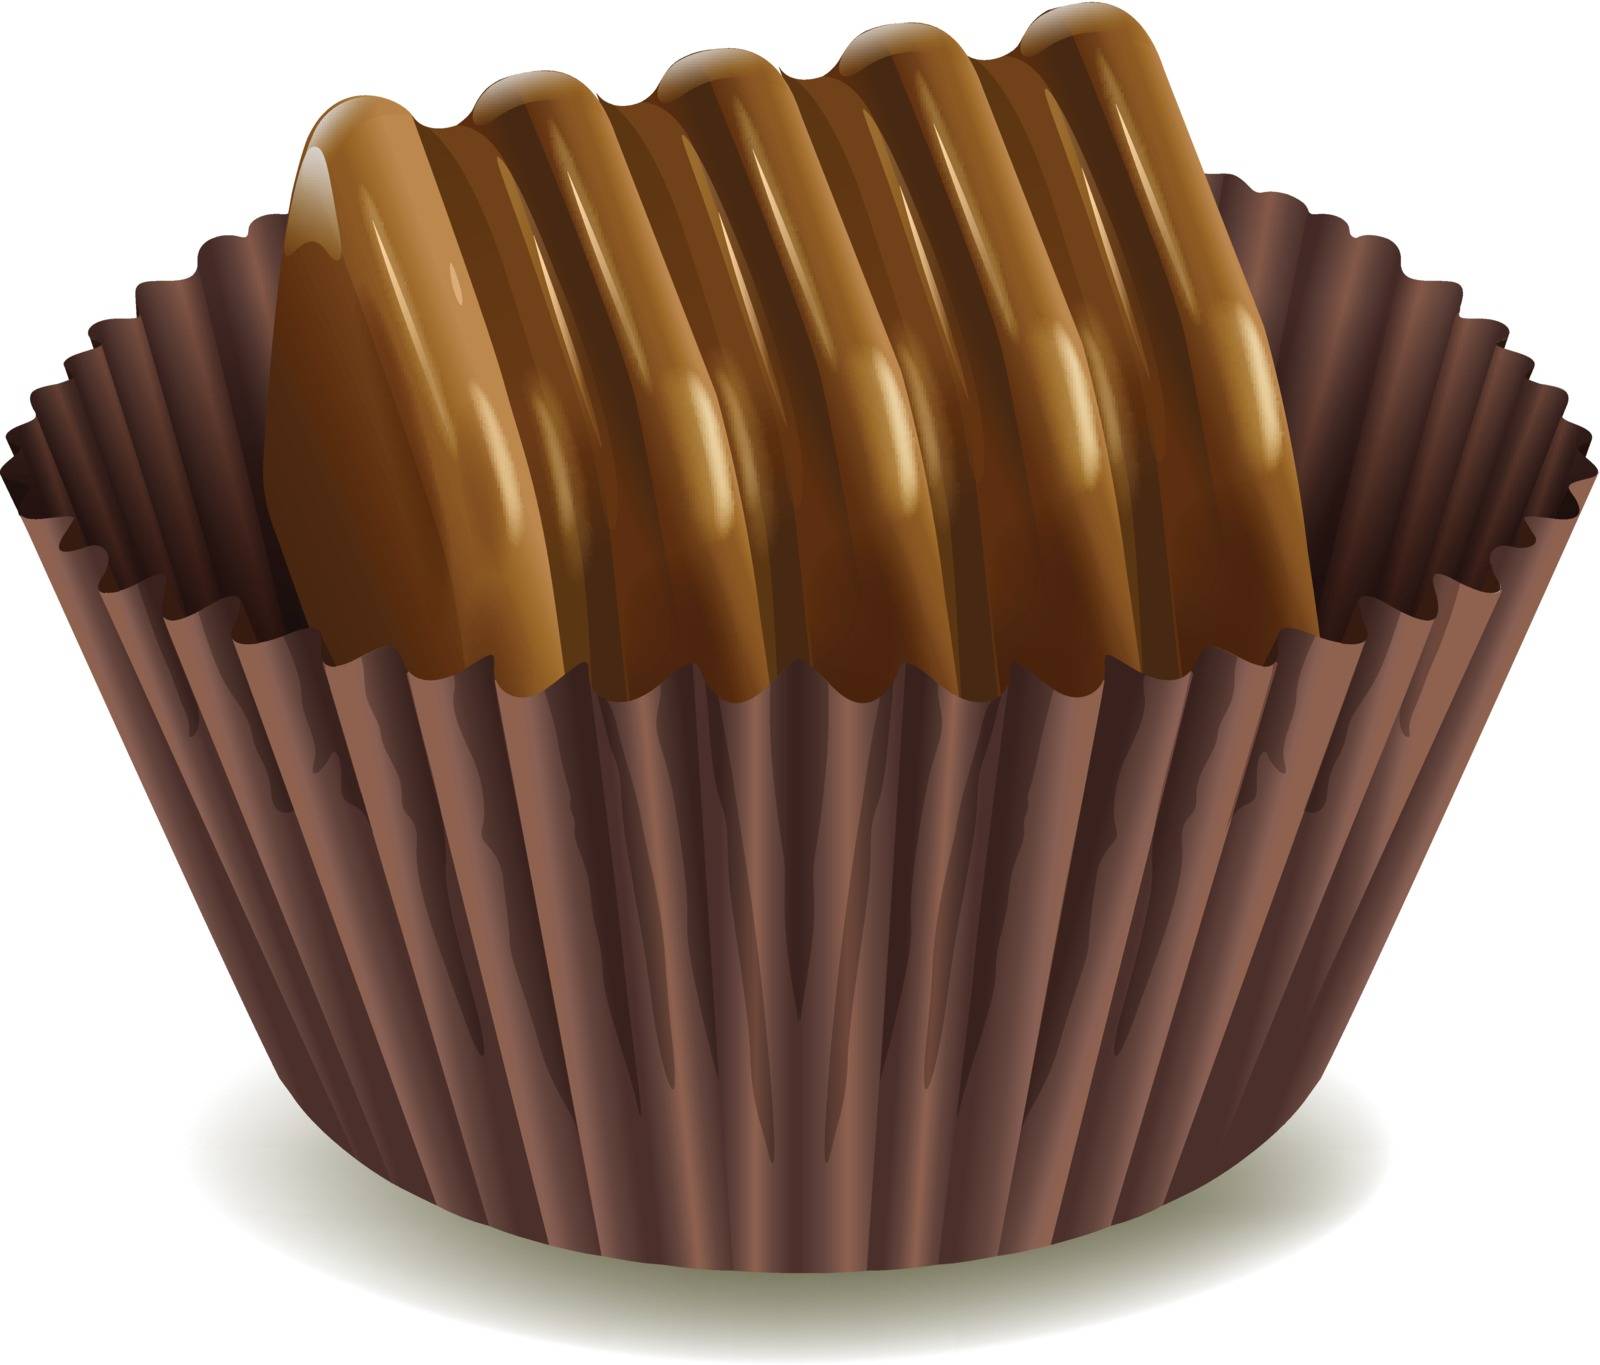 illustration of chocolates in brown cup on a white background